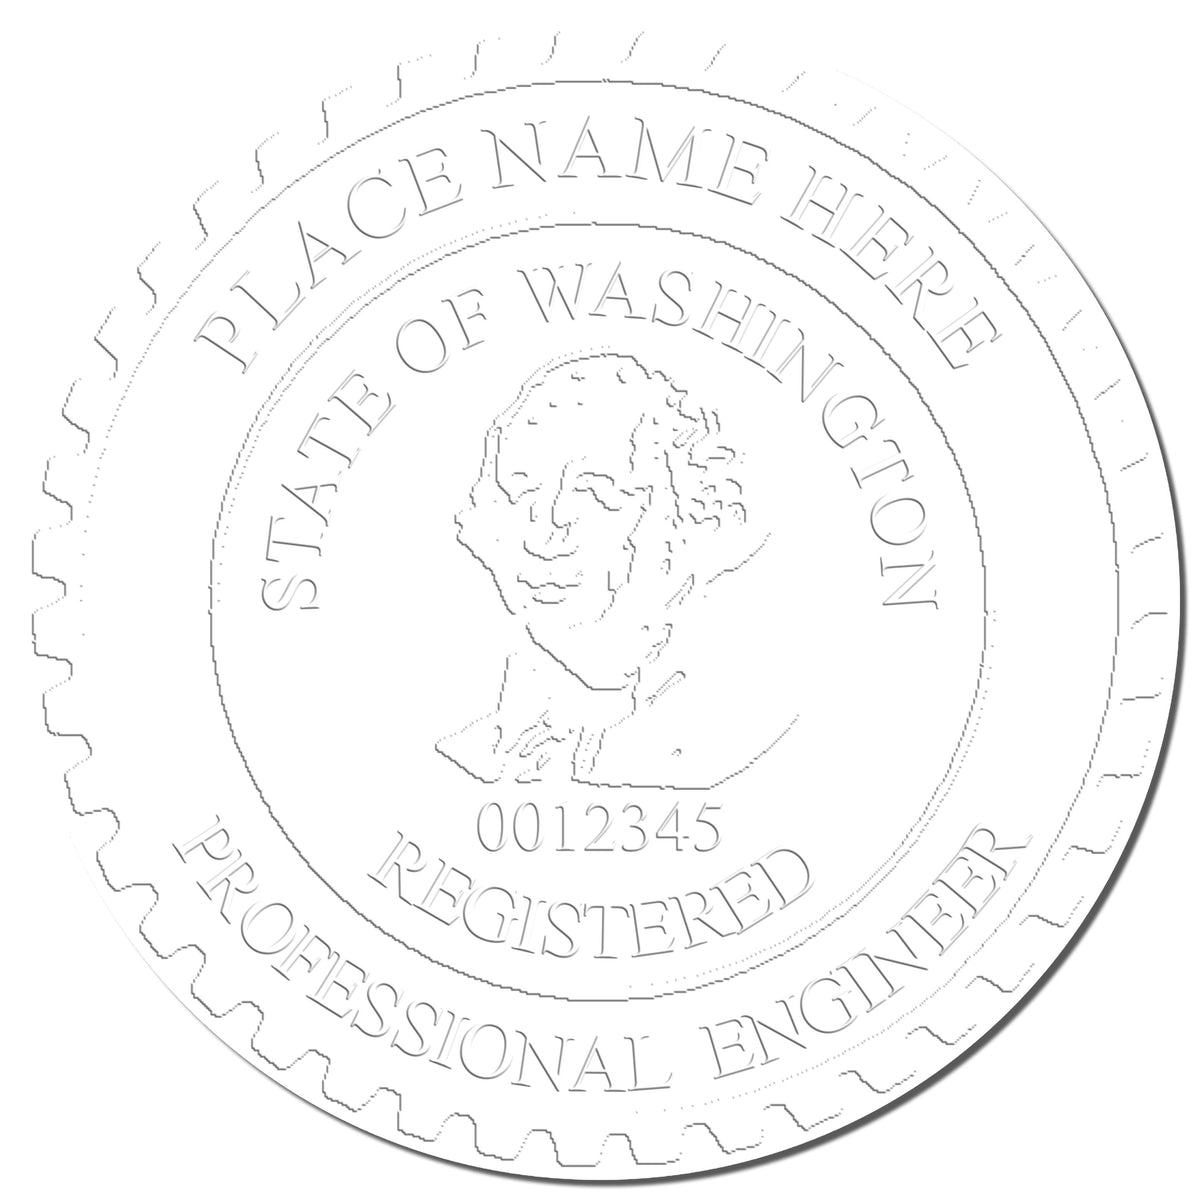 This paper is stamped with a sample imprint of the Gift Washington Engineer Seal, signifying its quality and reliability.